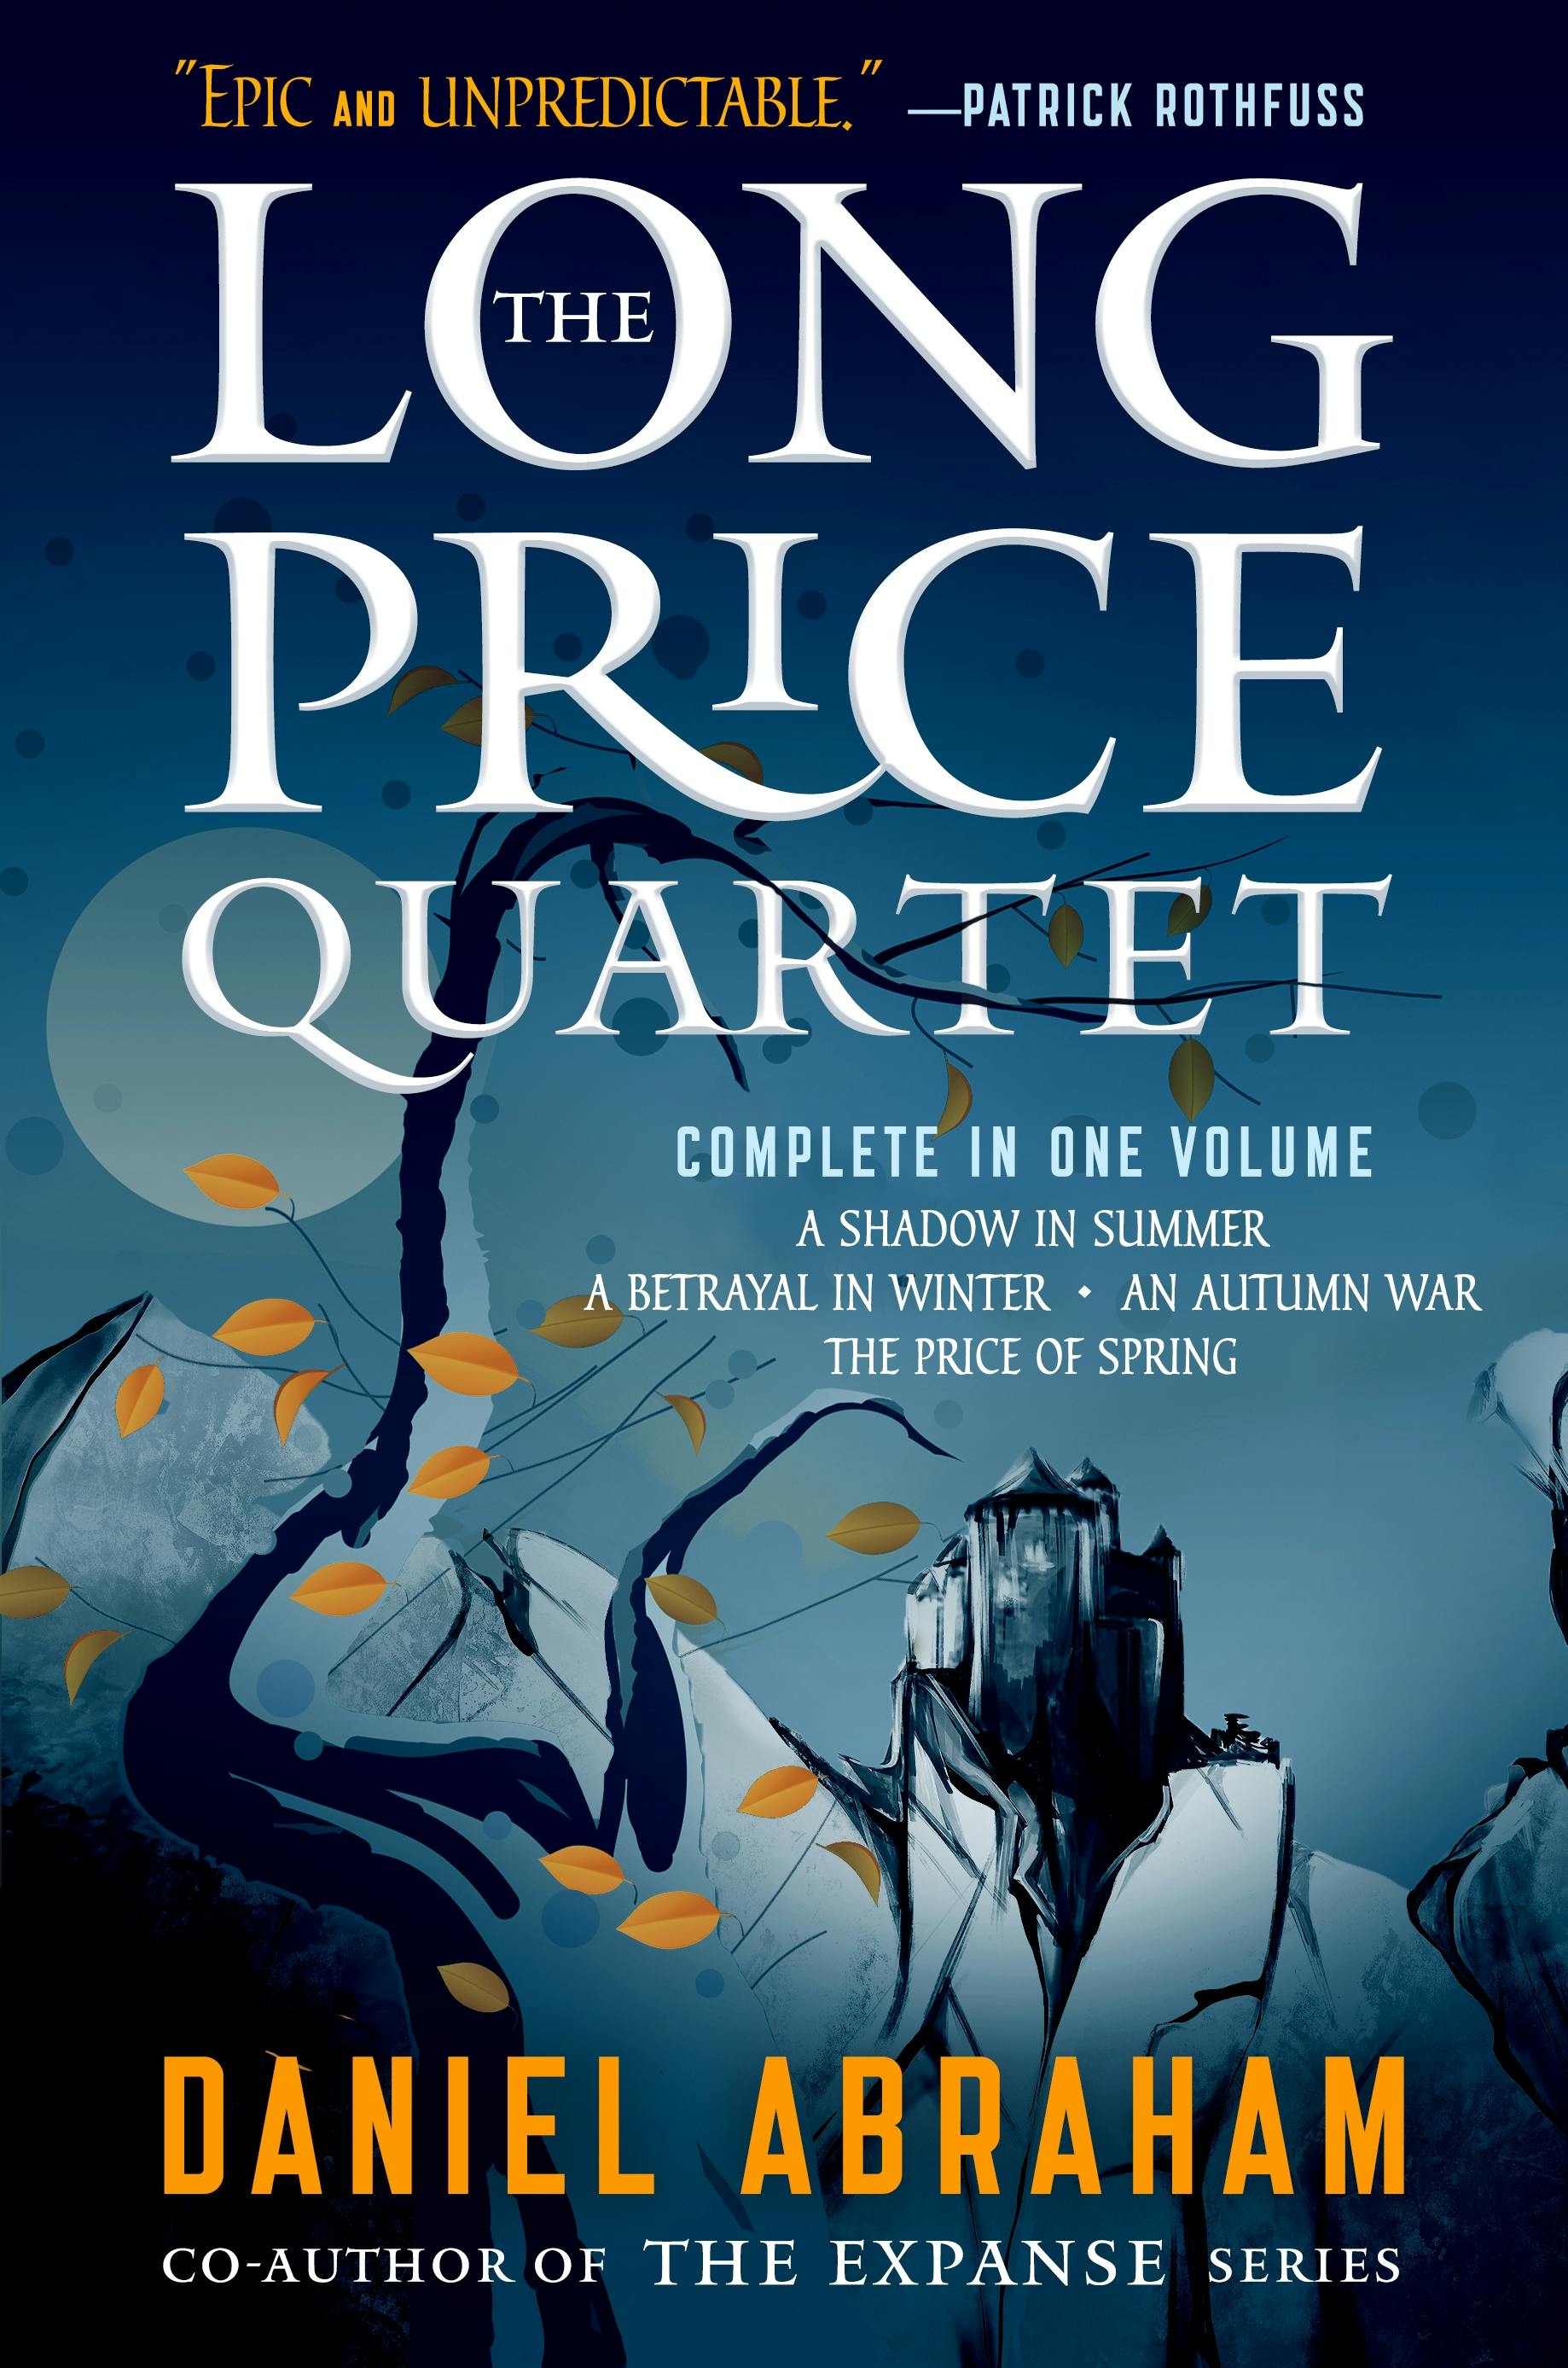 Cover for the book titled as: The Long Price Quartet